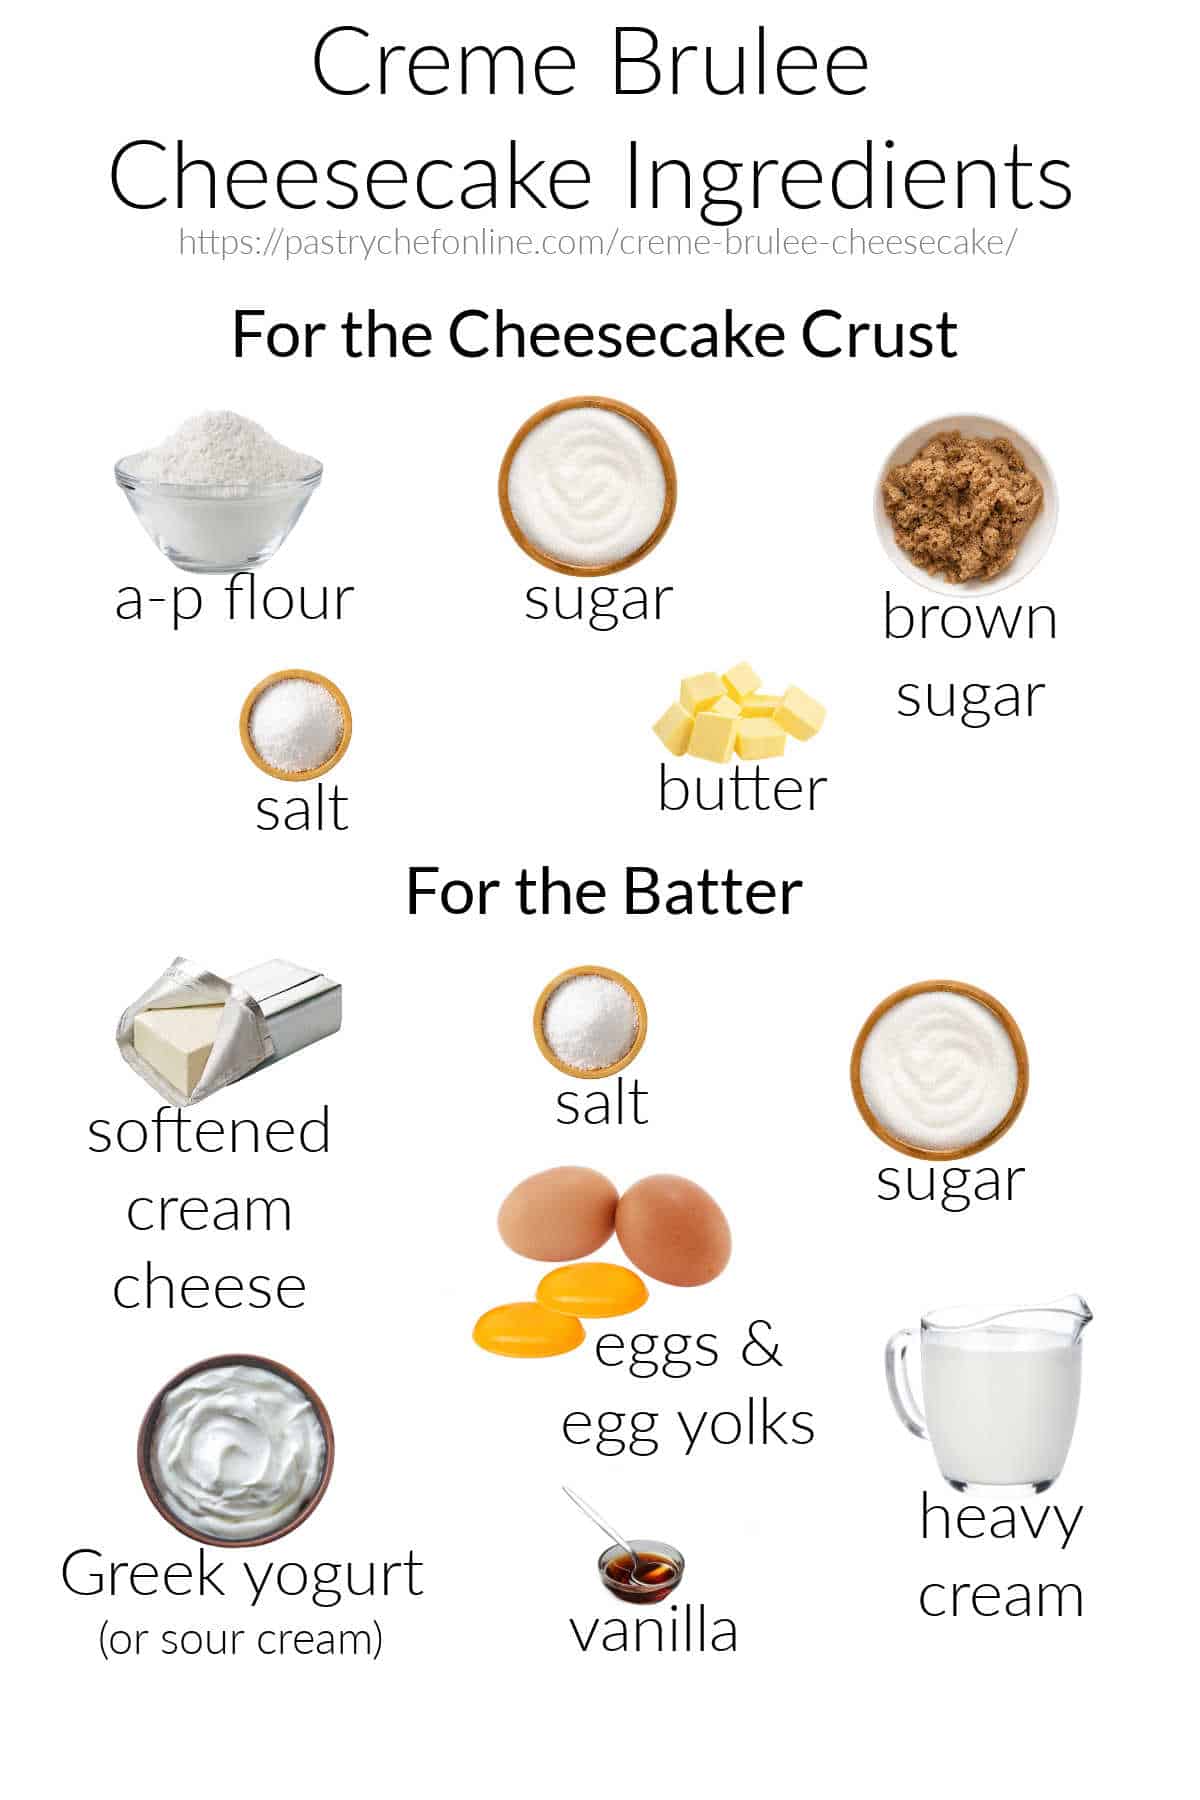 Images for the ingredients needed for both the crust and the batter for the creme brulee cheesecake, labeled and on a white background.